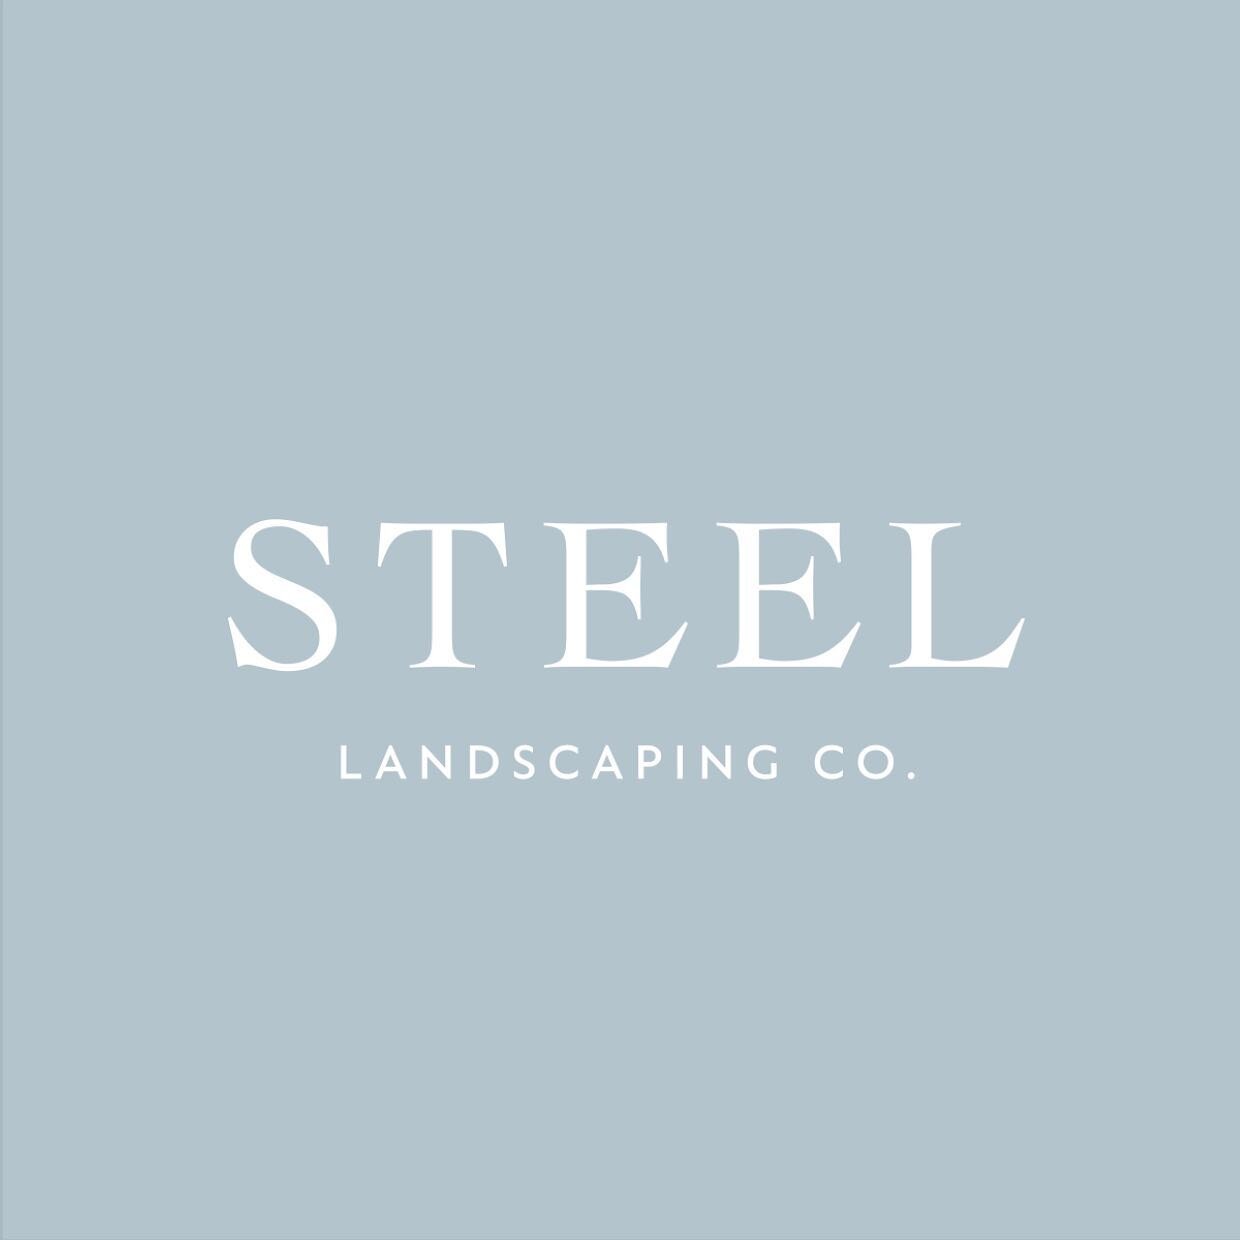 We are very excited to be launching our new company Steel Landscaping Co. 

Steel Landscaping Co. is a family run business, passionate about crafting bespoke steel products for your outside space.

We have a wealth of experience and are committed to 